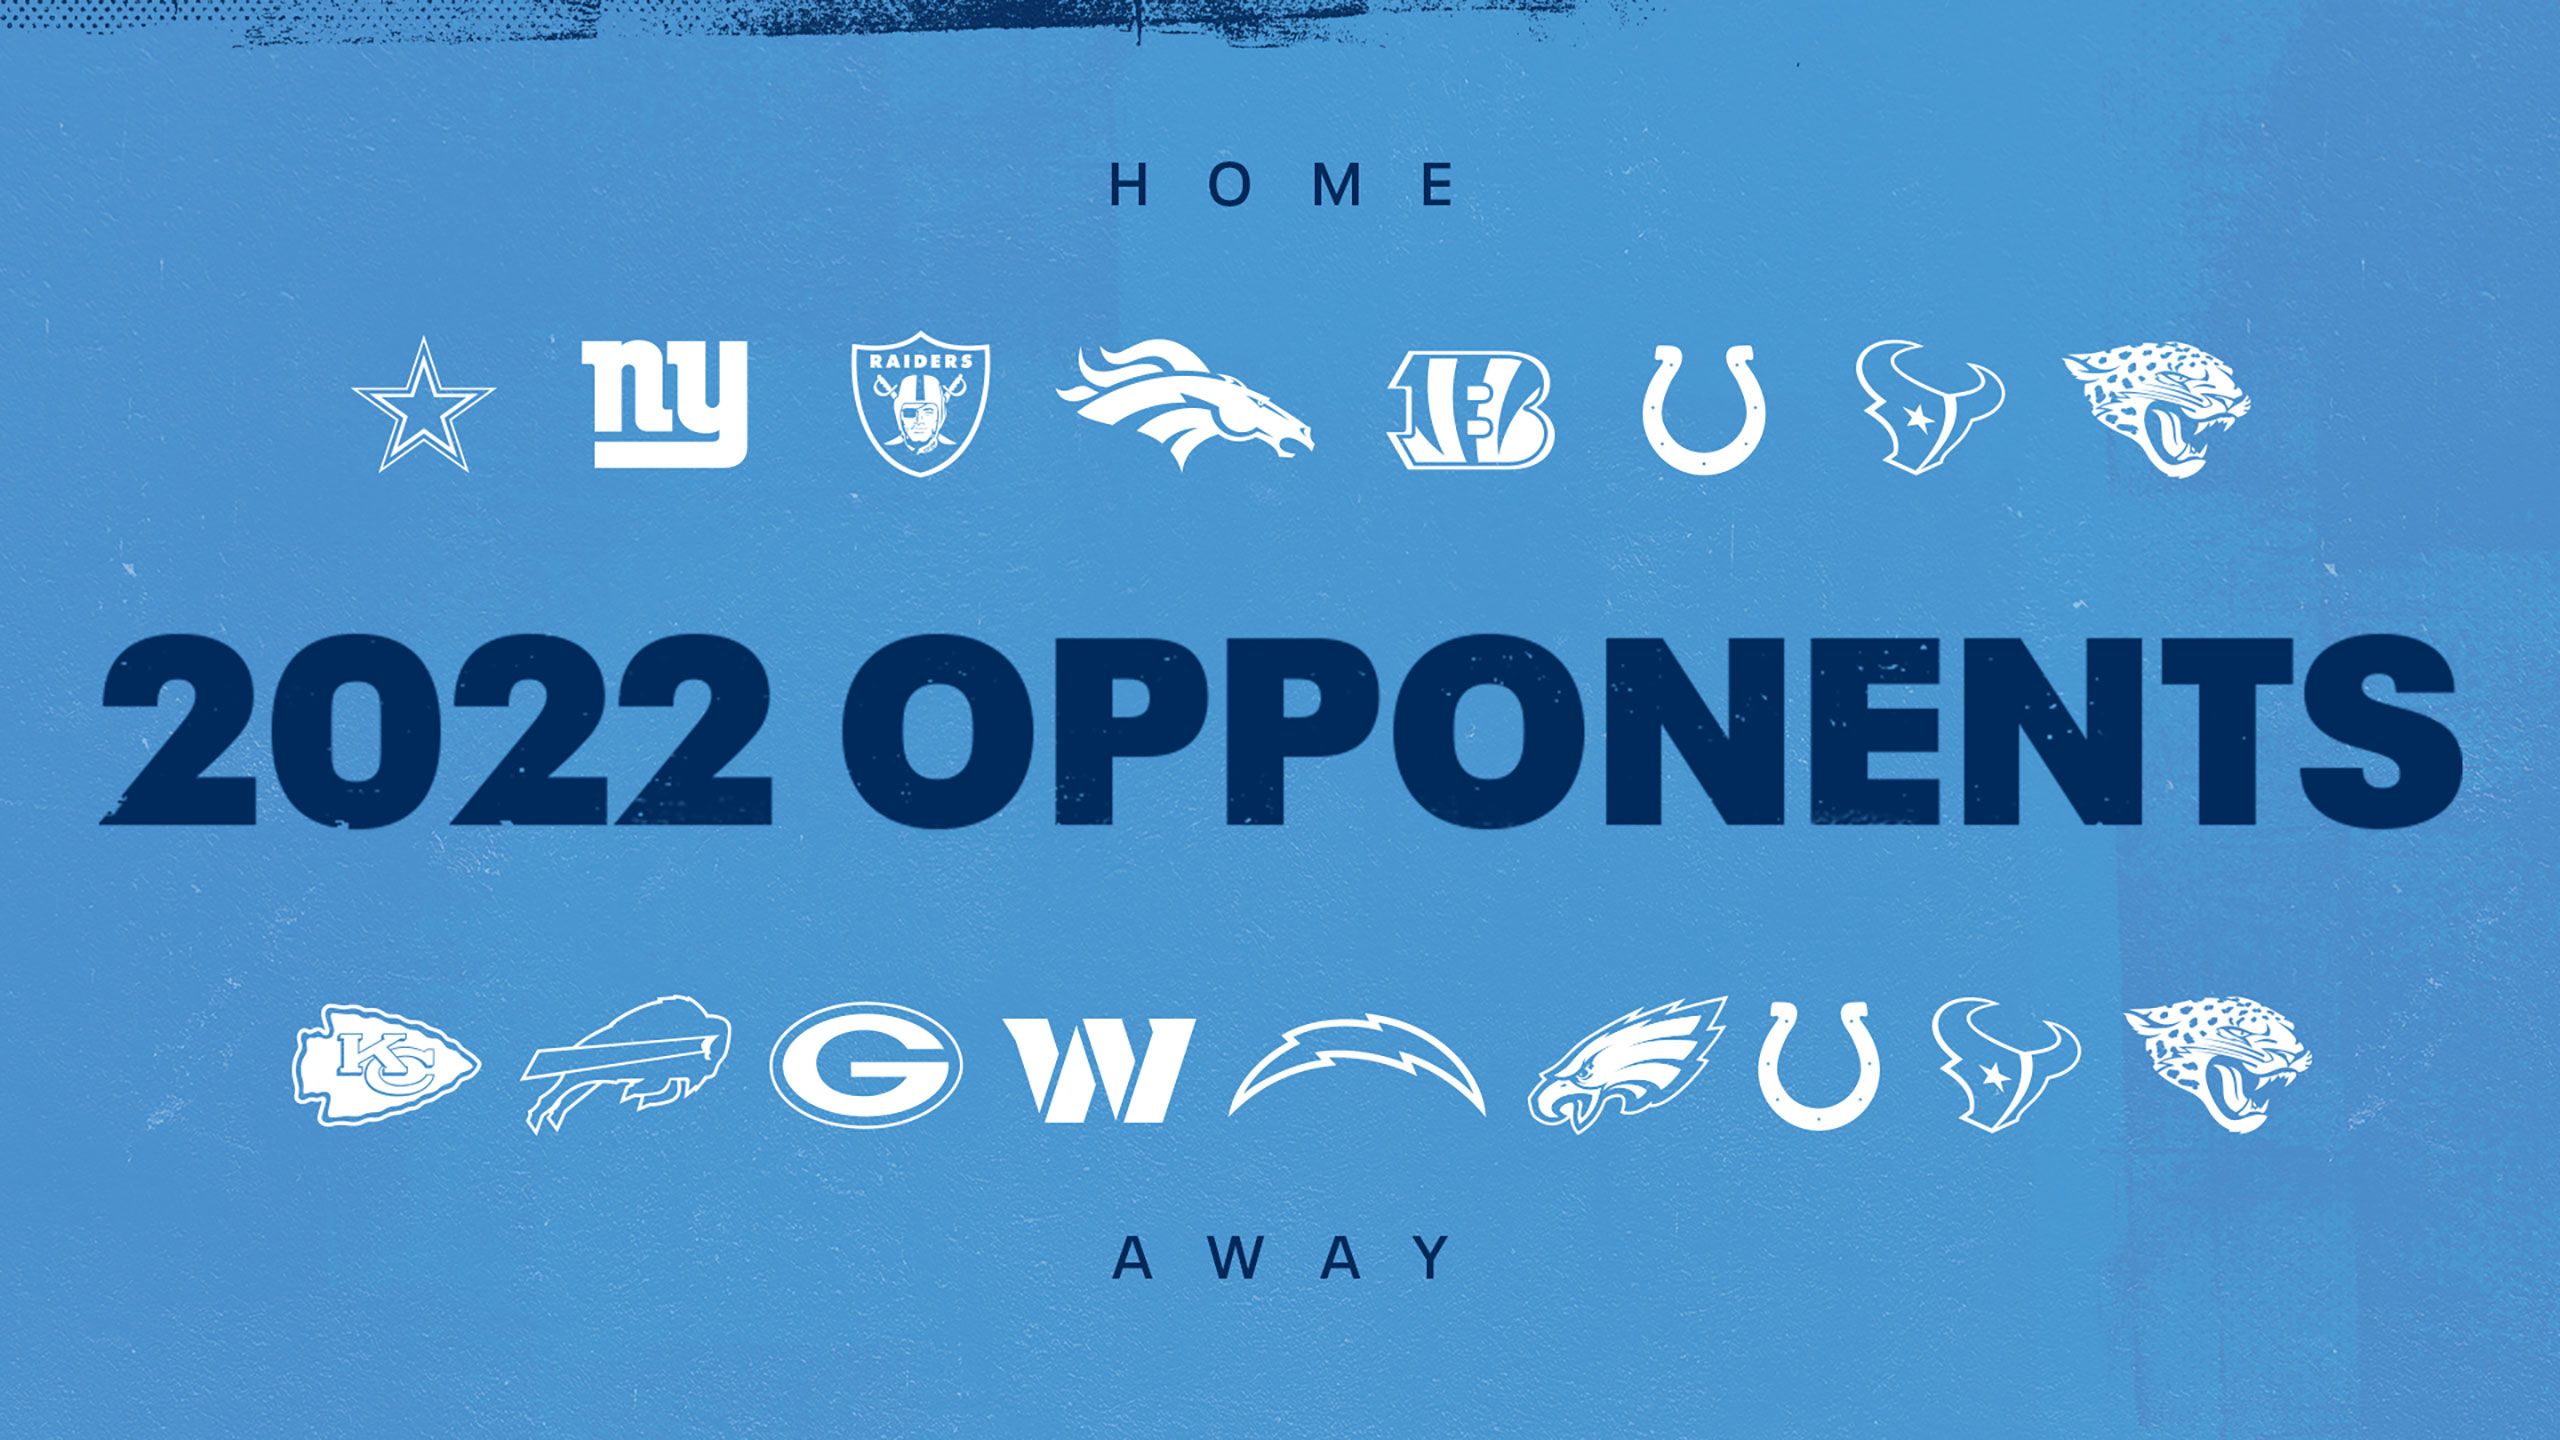 Lions Schedule 2022 23 Tennessee Titans Future Opponents | Tennessee Titans - Tennesseetitans.com